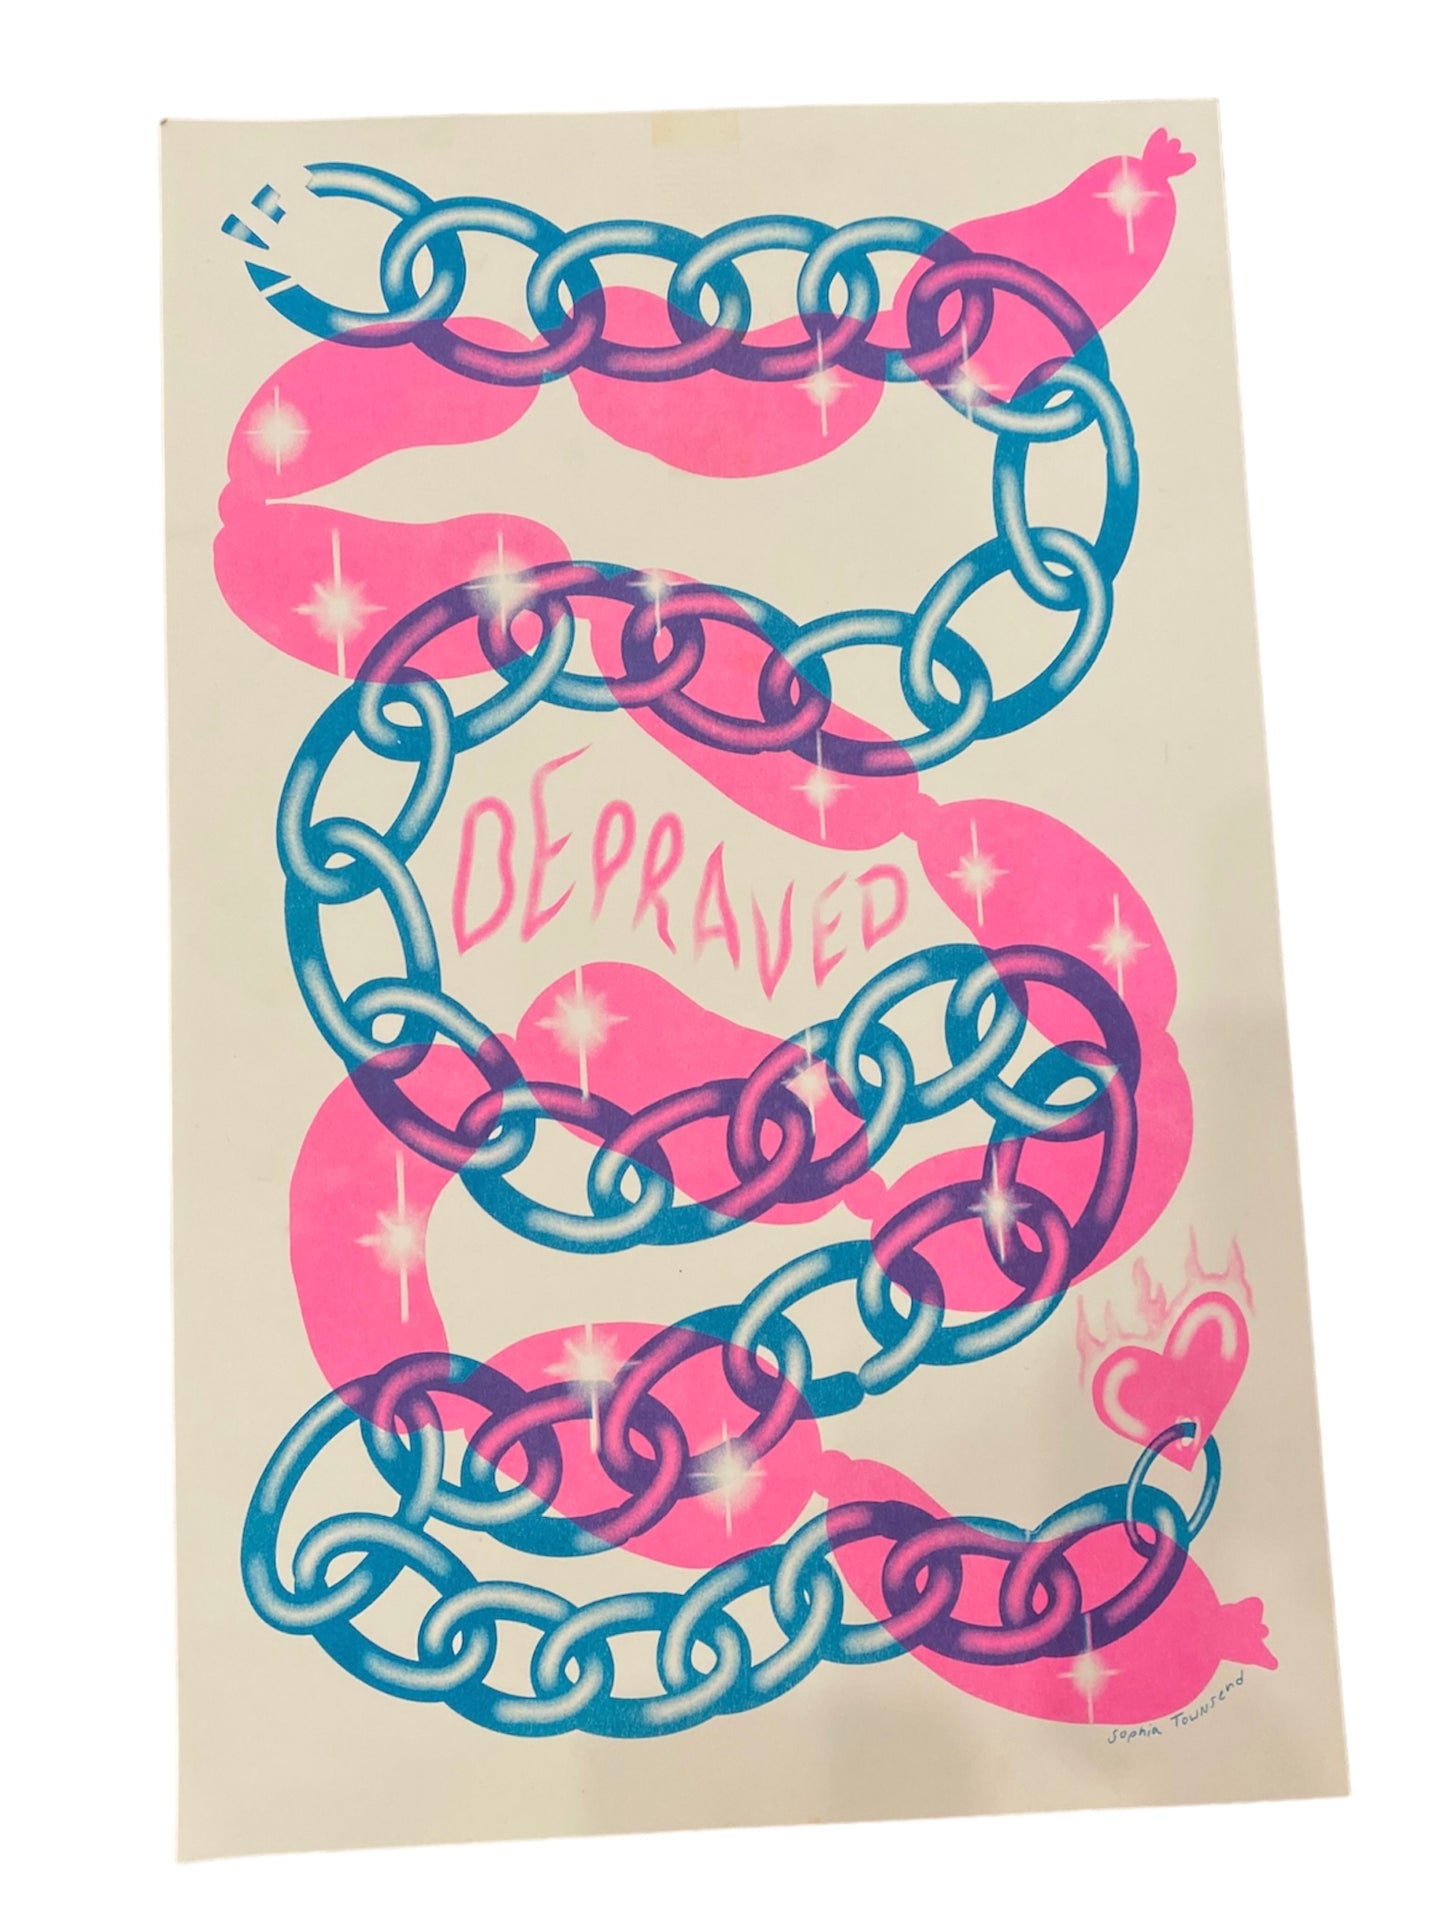 Handmade ‘Depraved’ Risograph Print by Stoopid Chic